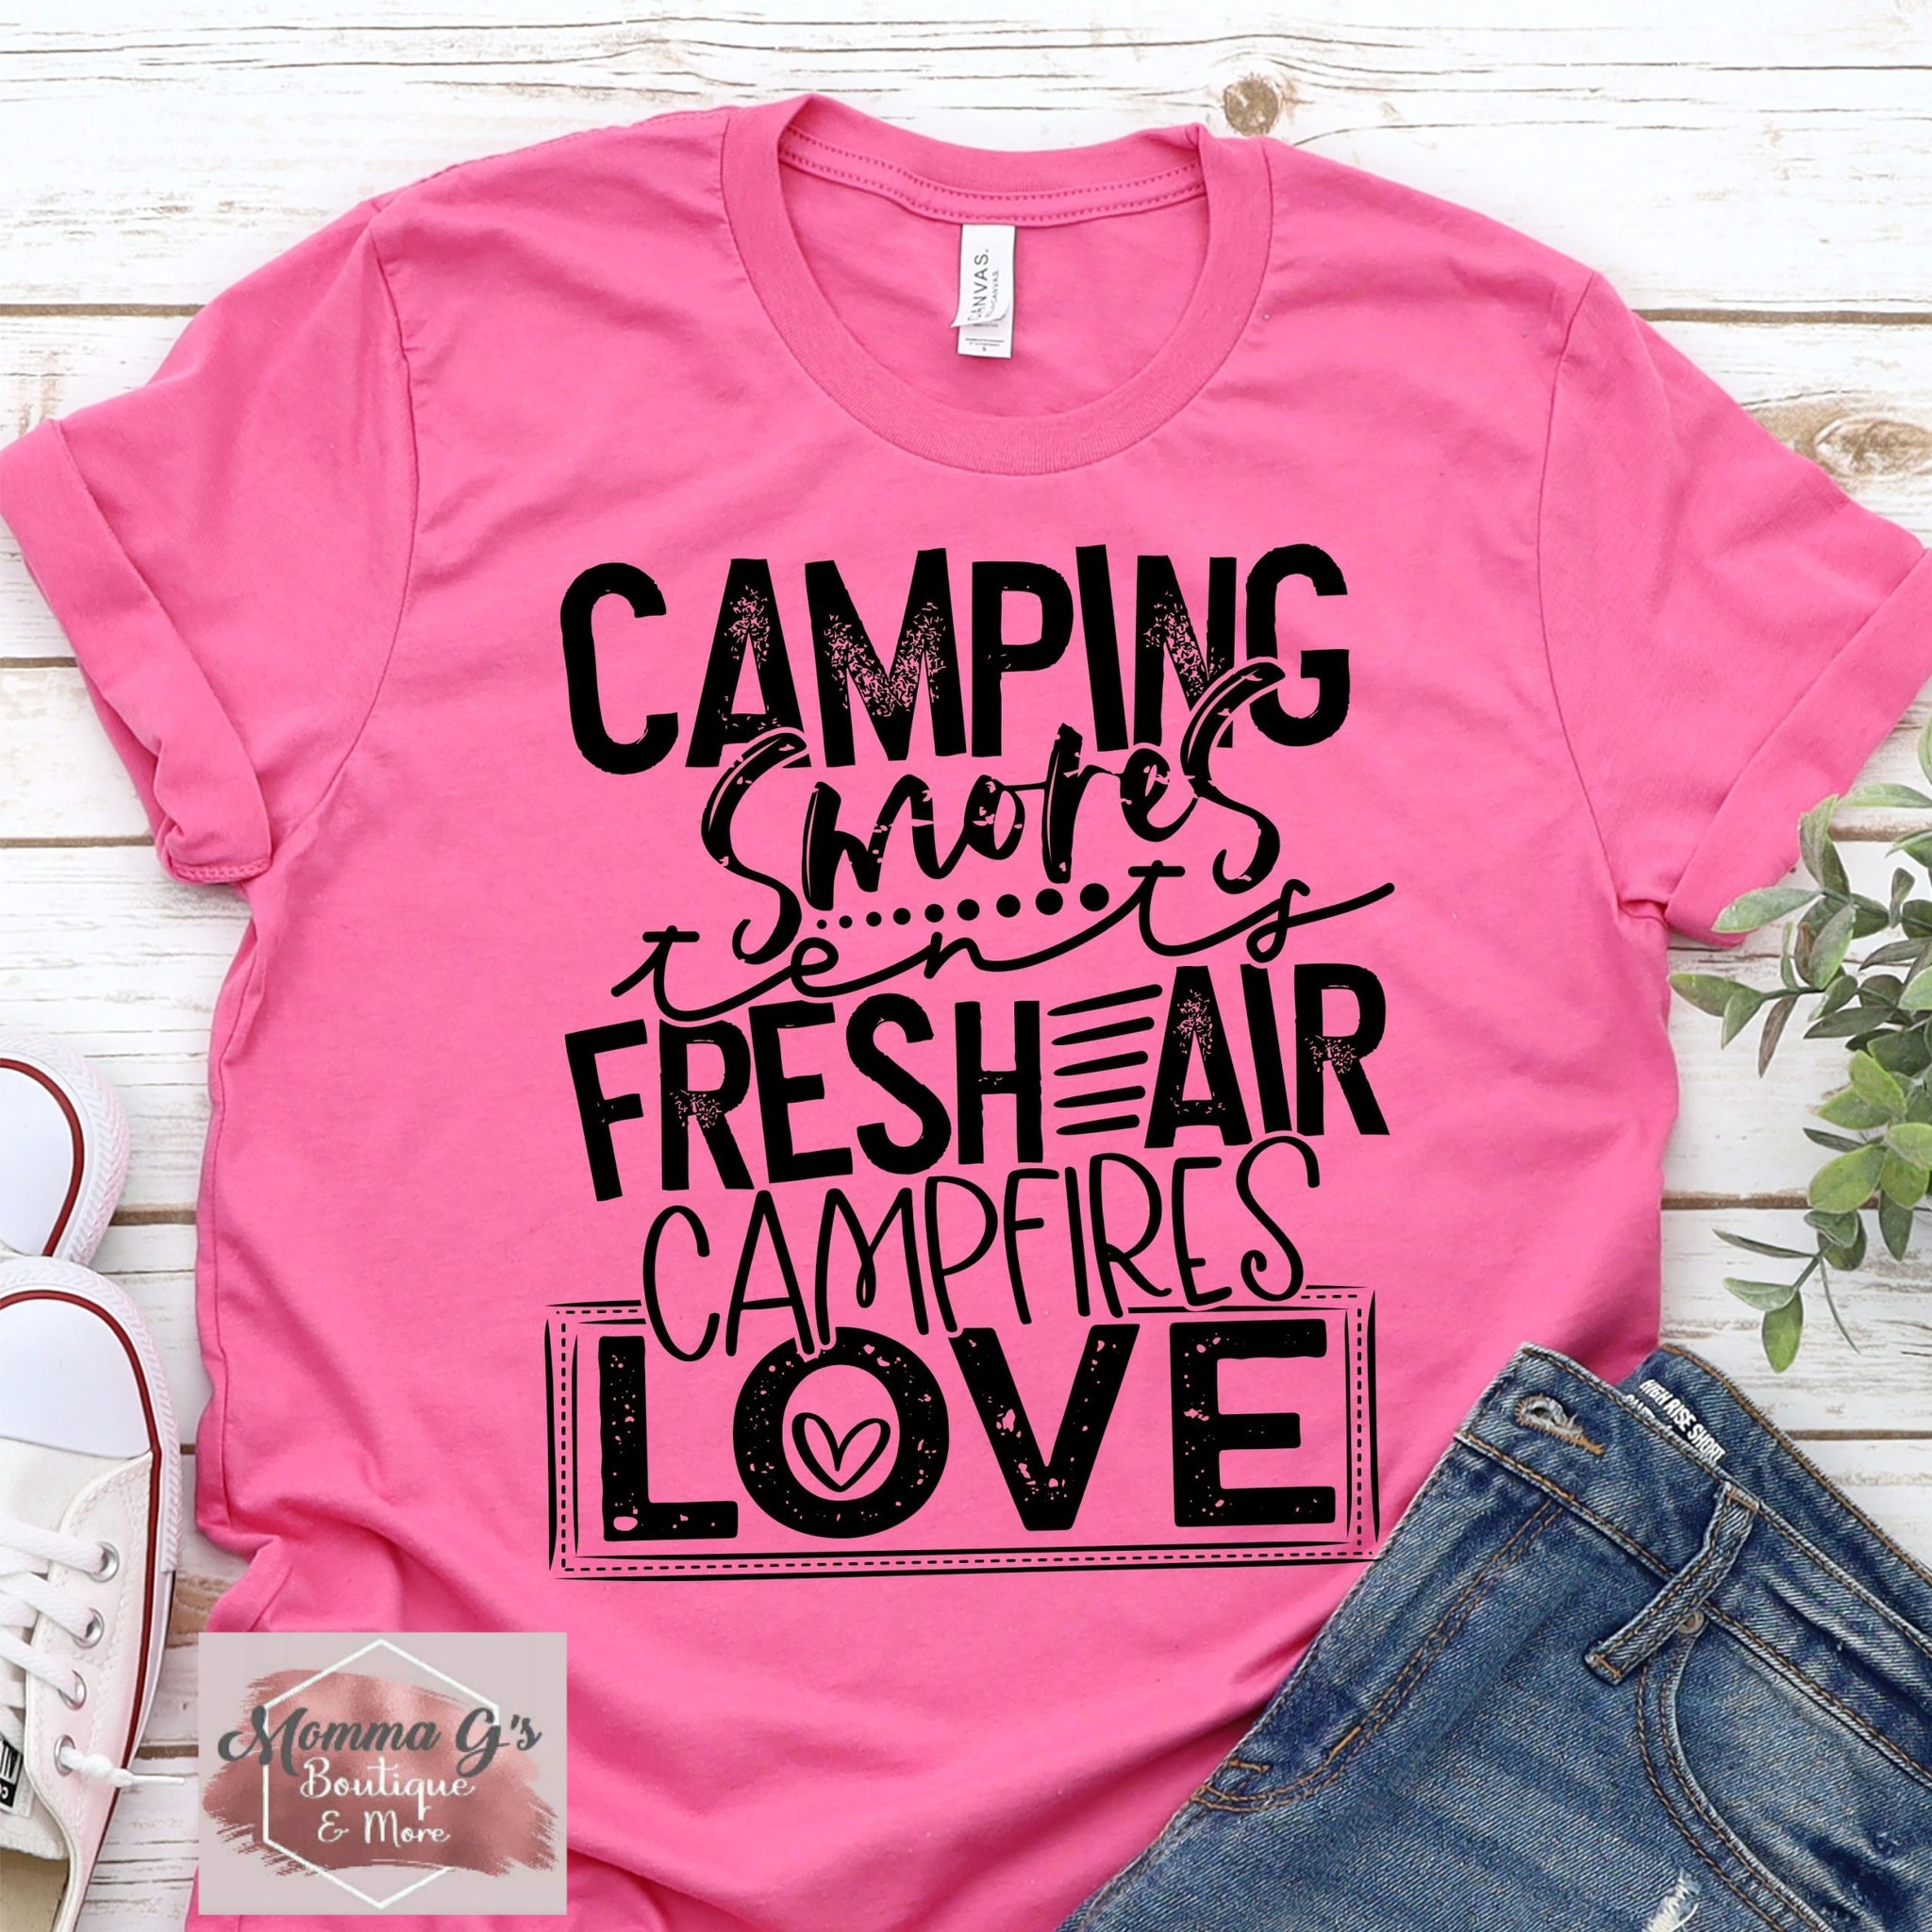 Camping Love T-shirt, tshirt, tee - Momma G's Children's Boutique, Screen Printing, Embroidery & More